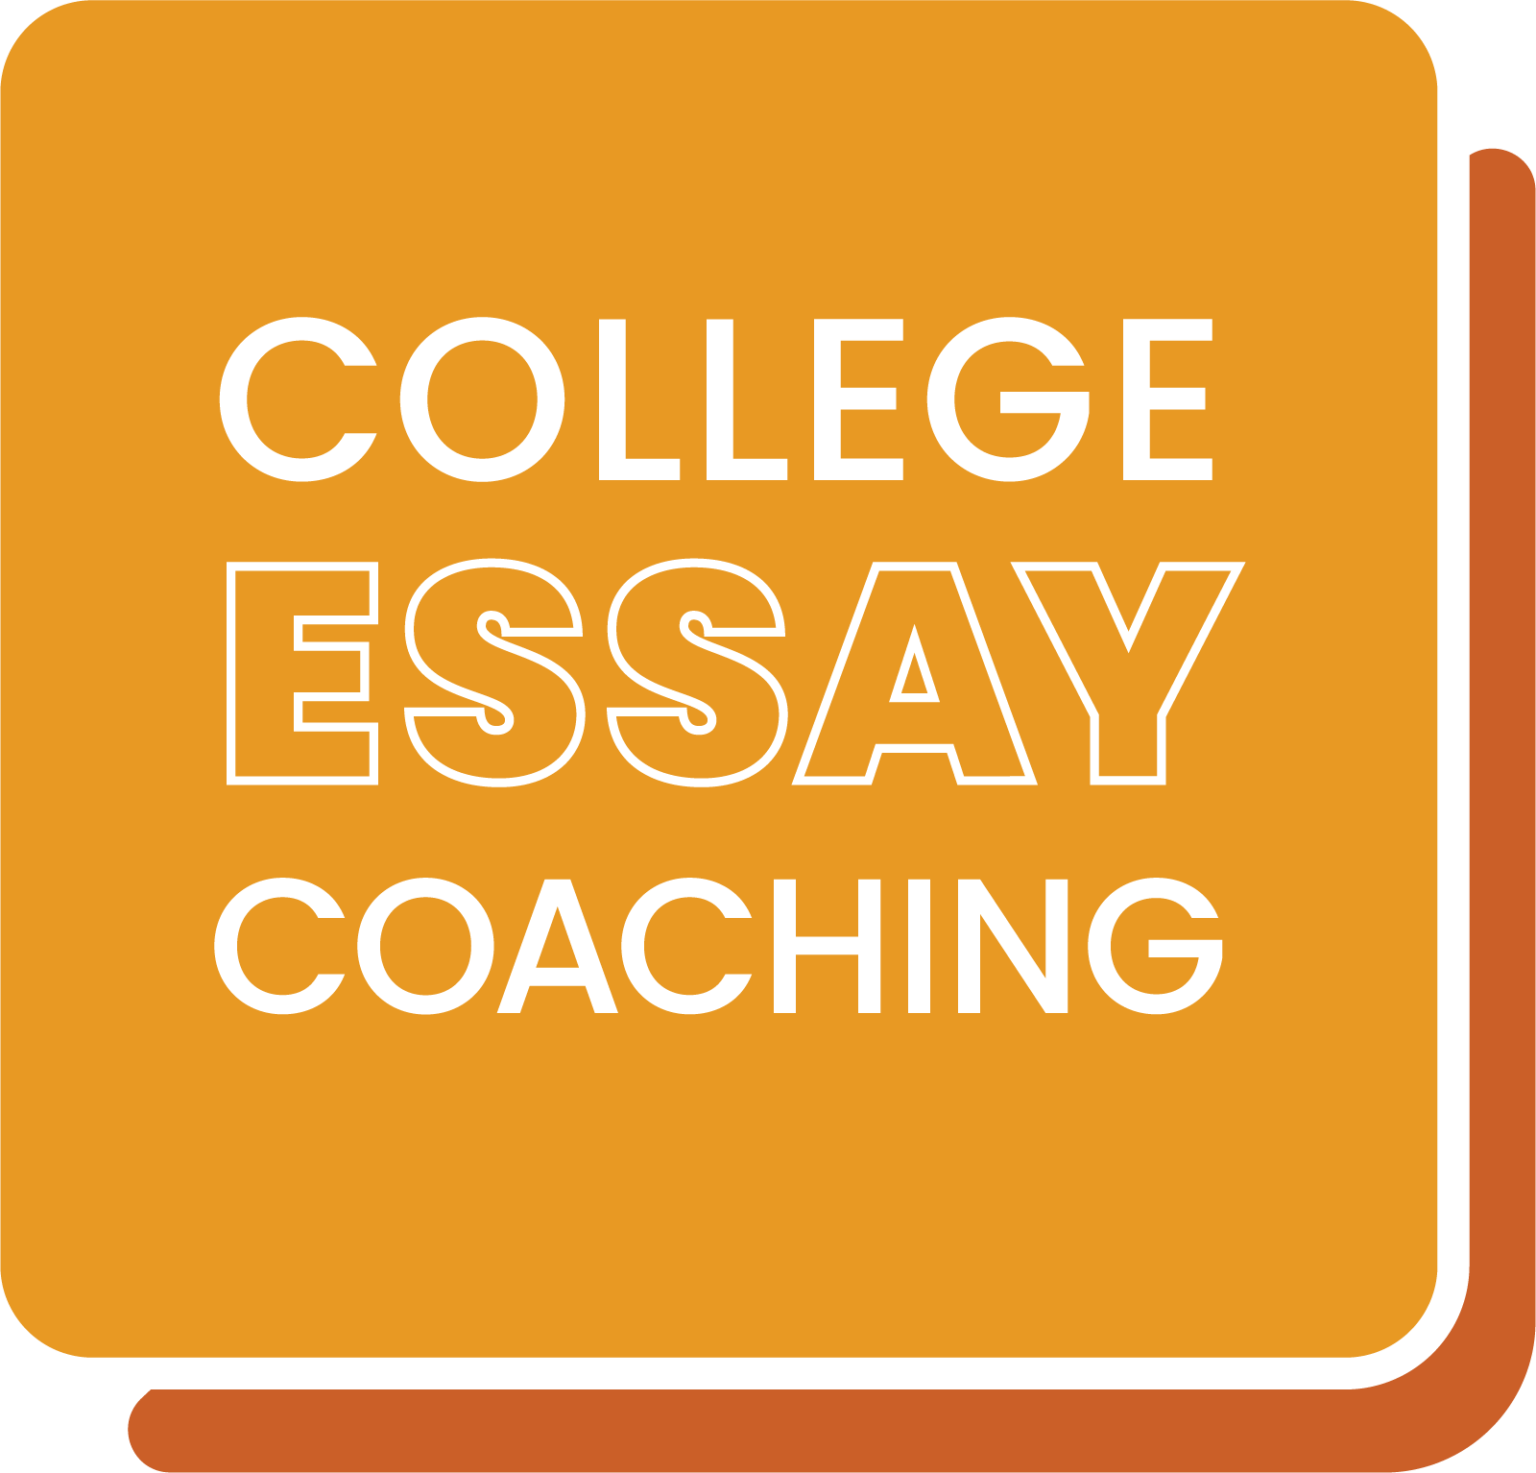 5 page essay on coaching